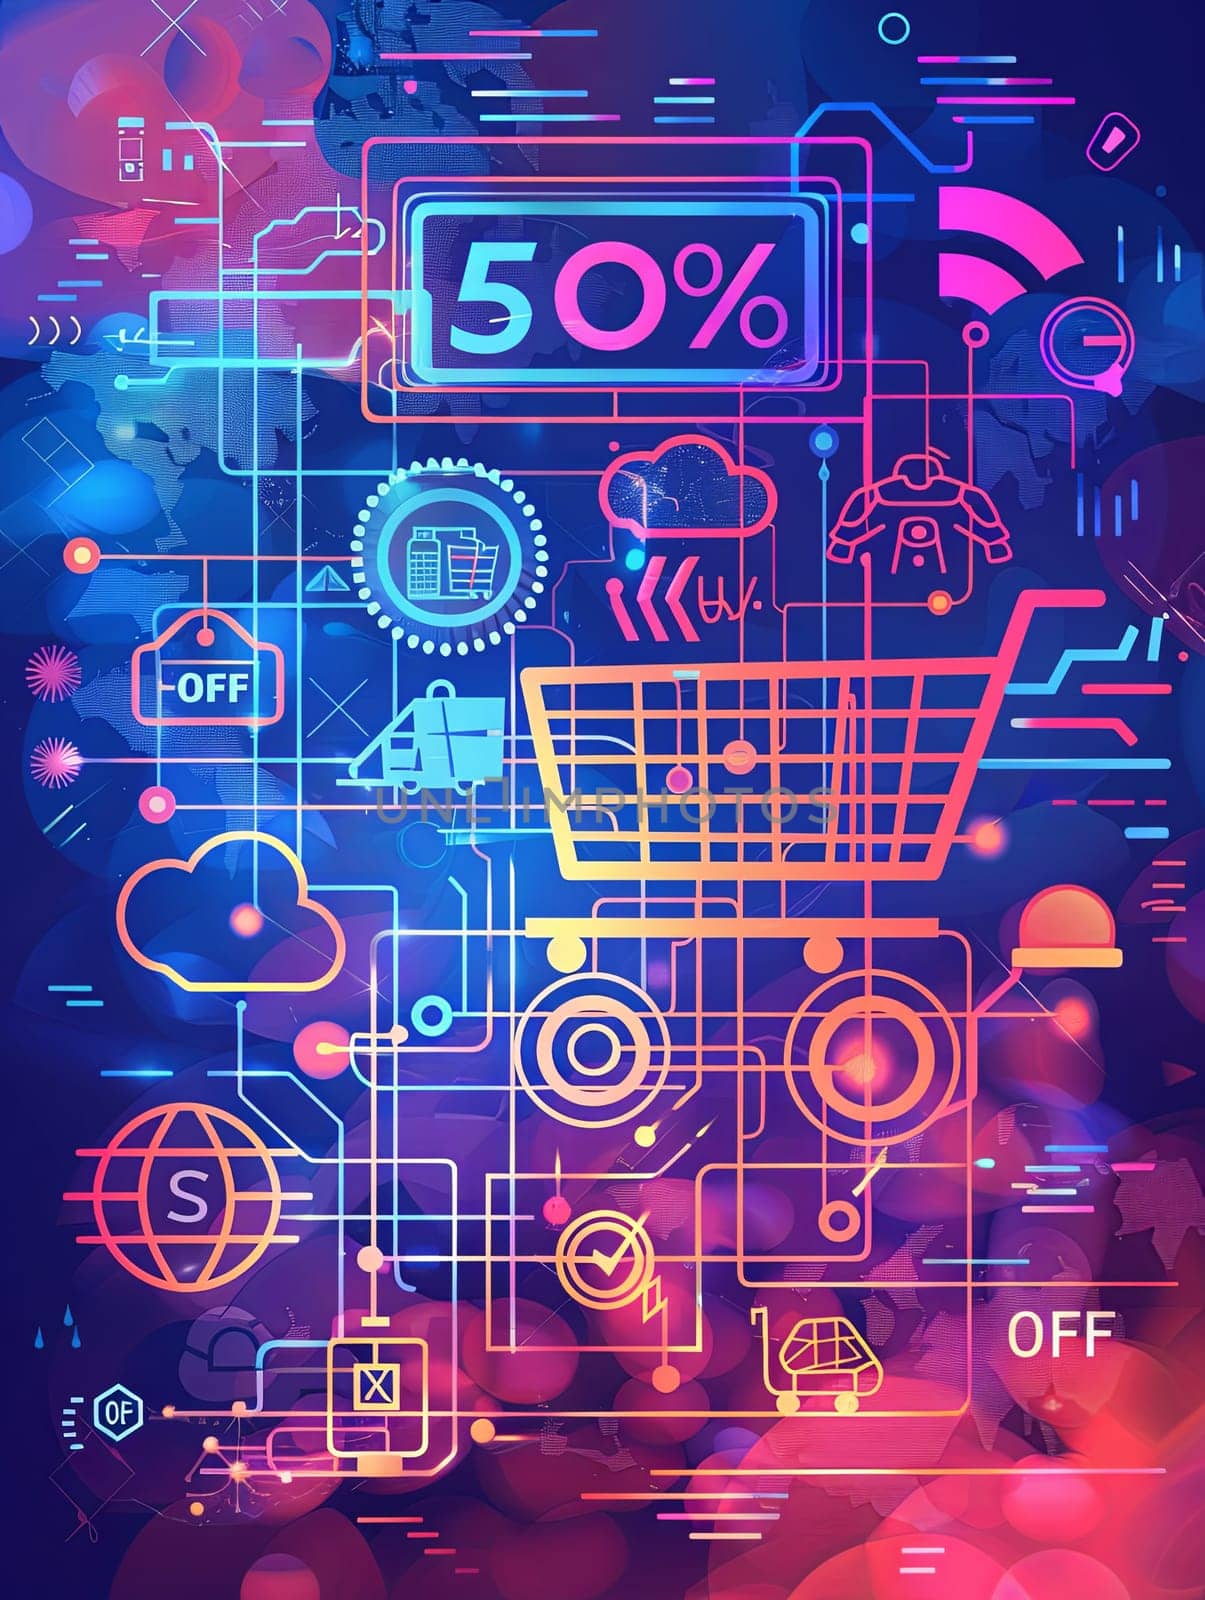 Abstract background with a shopping cart, digital icons, and a large 50% OFF text.